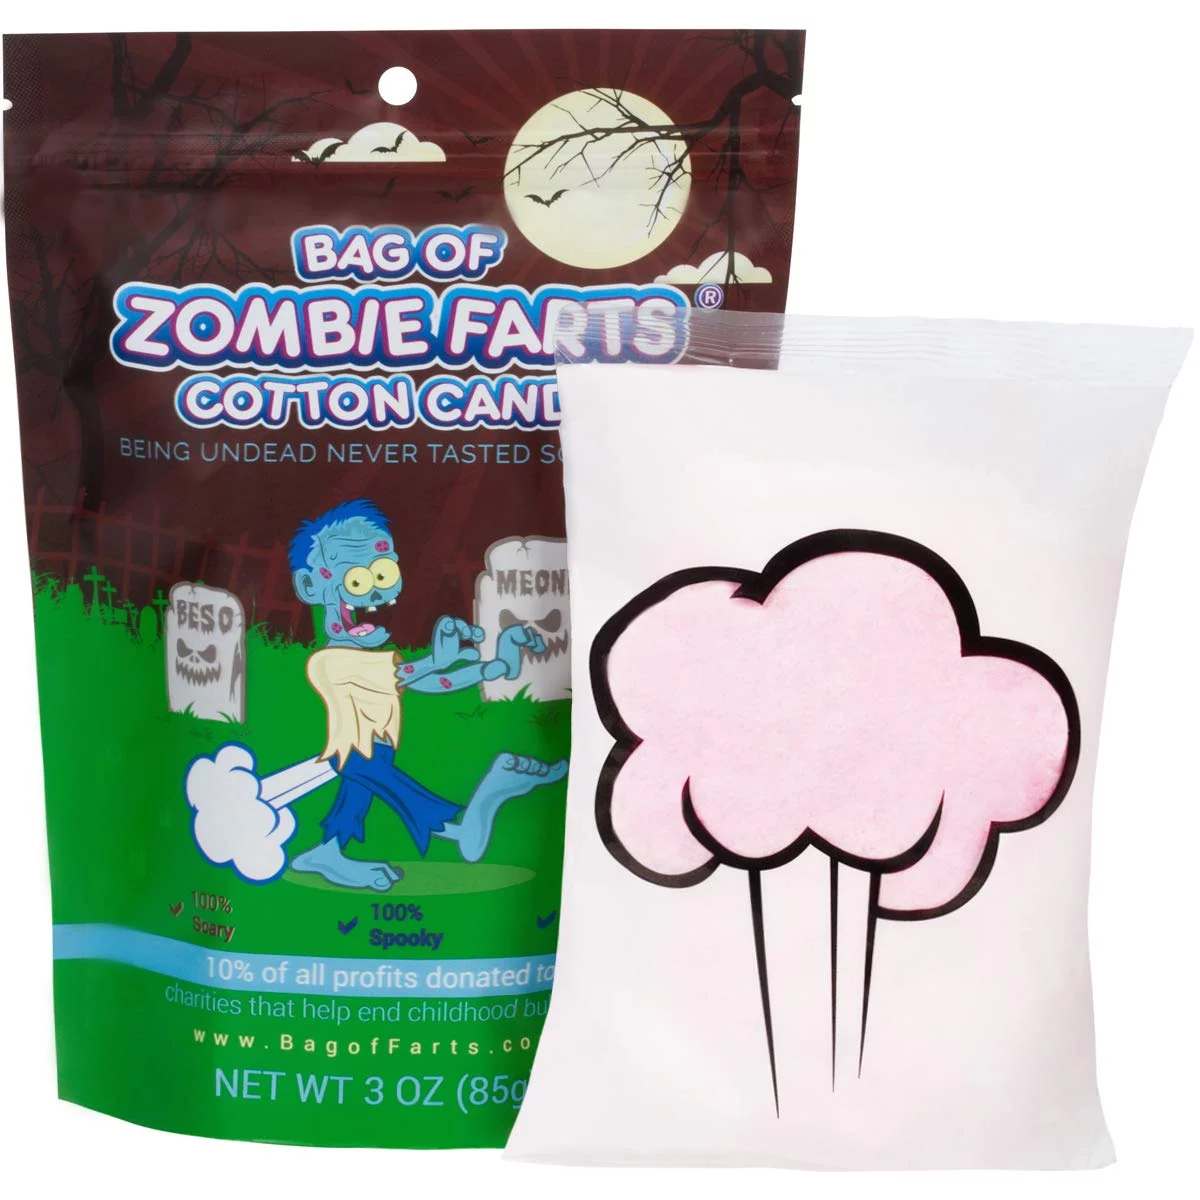 Best Halloween Gifts 2022: Zombie Farts Cotton Candy 2022